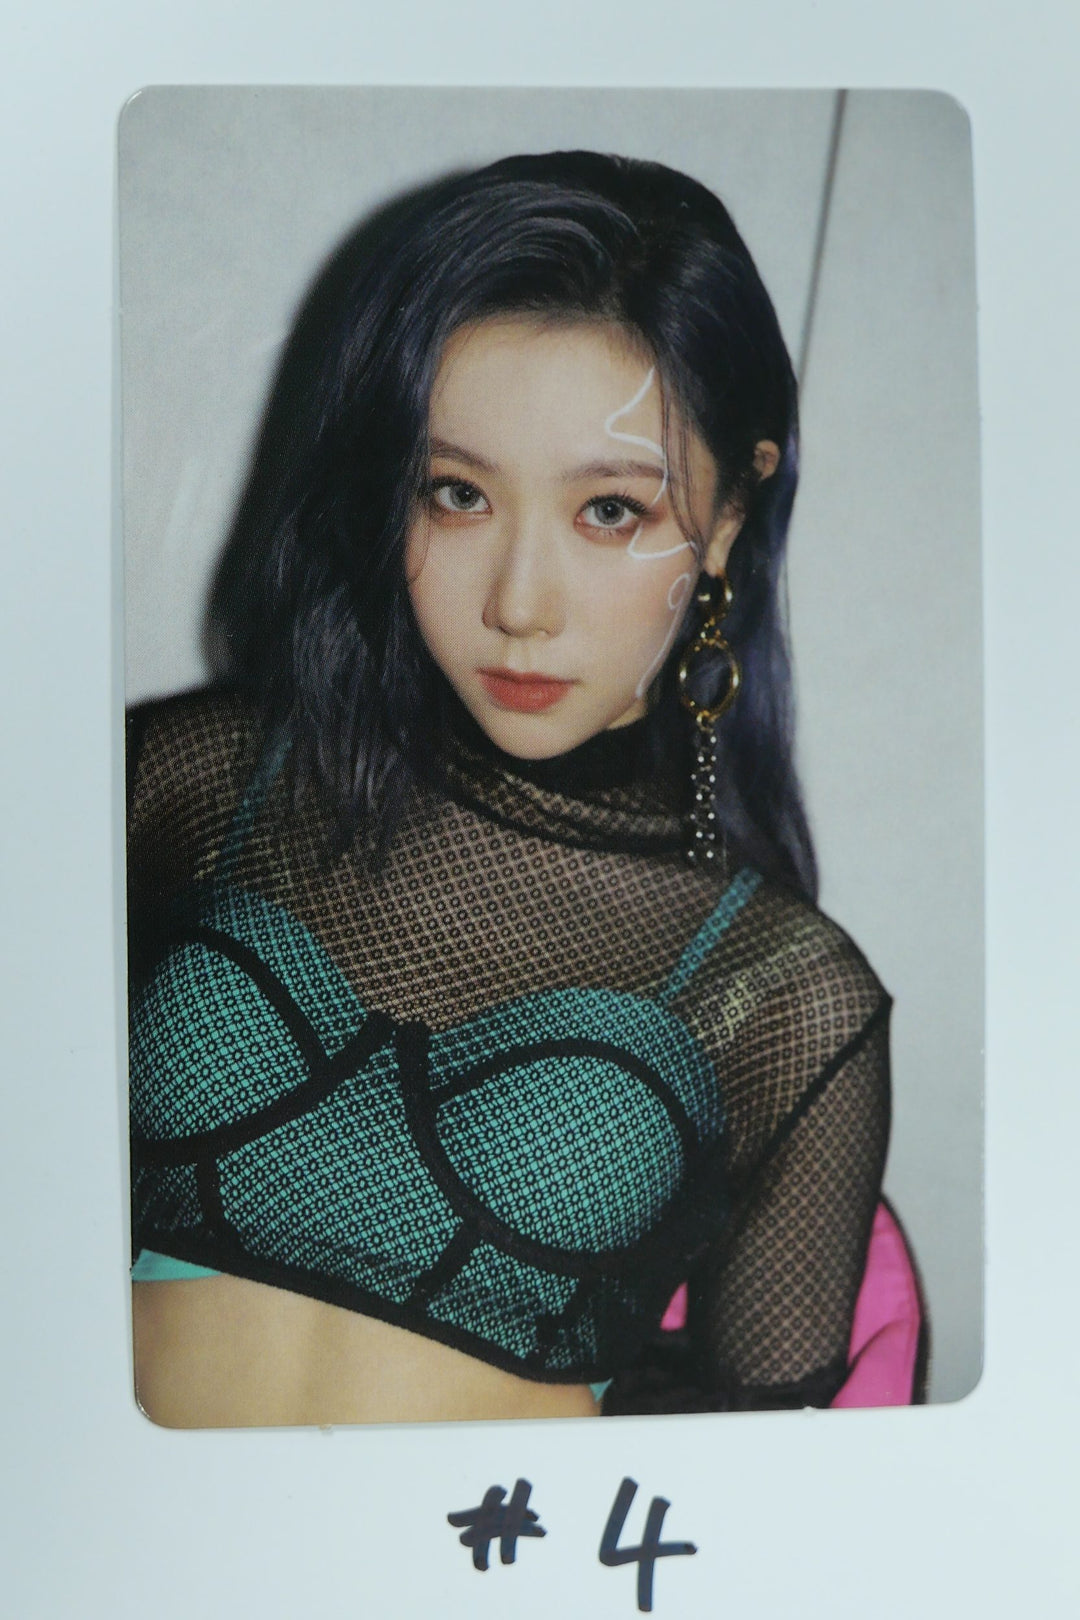 Dreamcatcher "Road To Utopia" - Handong Official Photocard